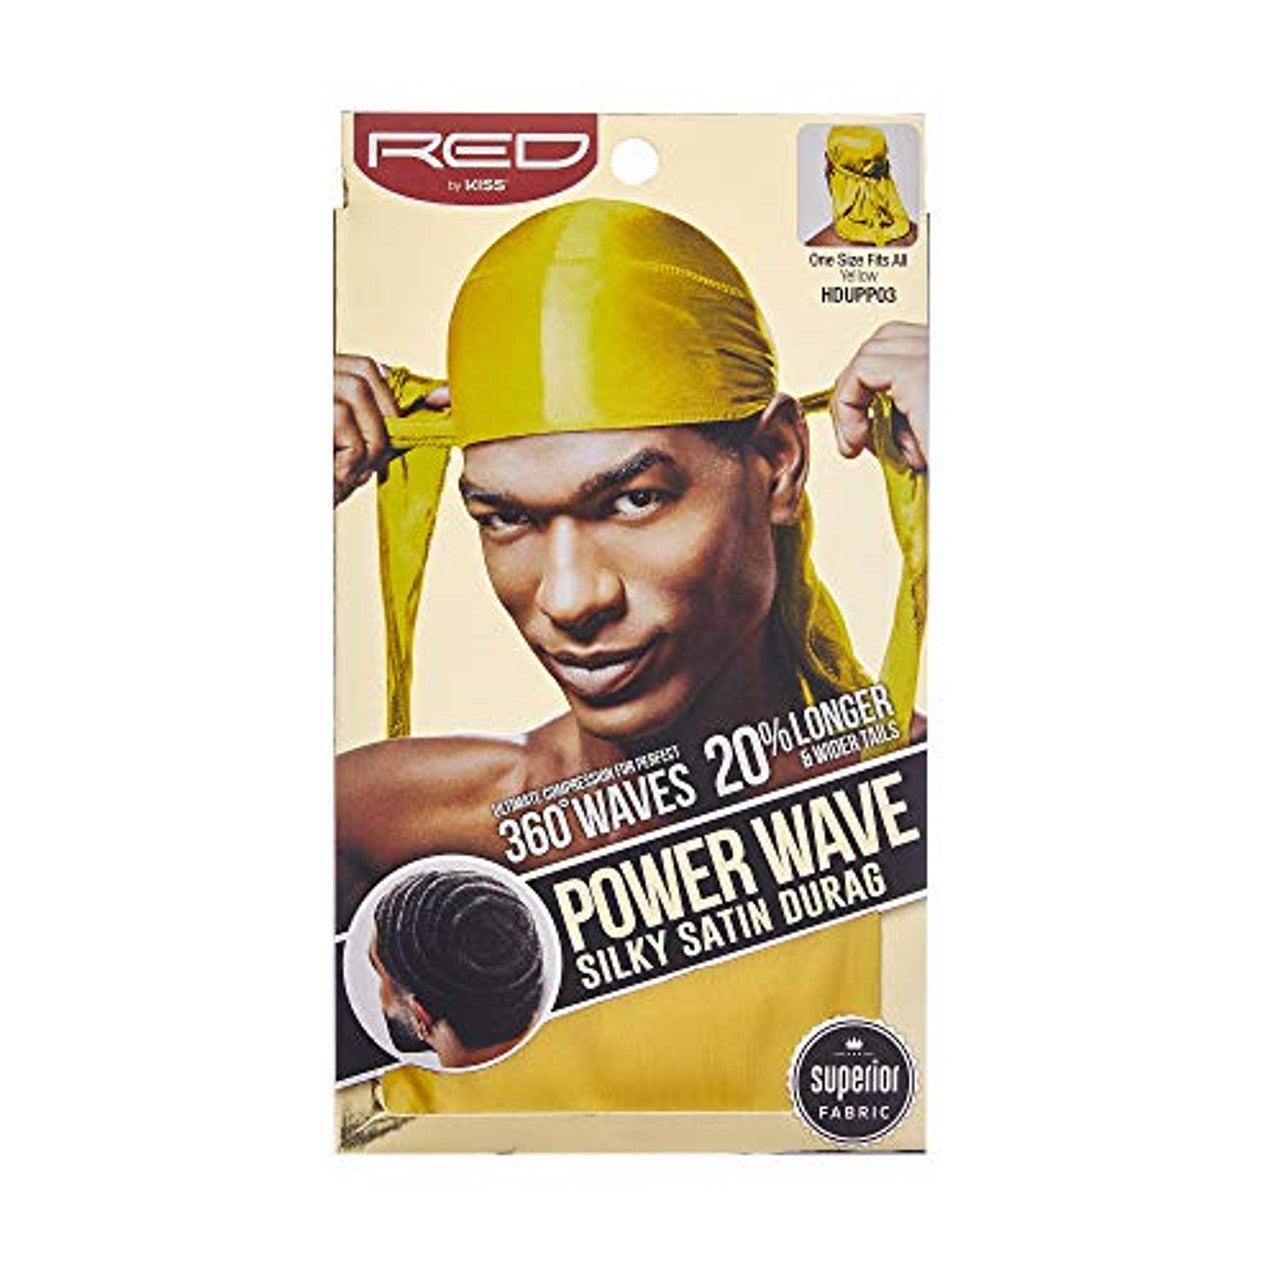 Red by Kiss Power Wave Silky Satin Durag - Yellow - #HDUPP03